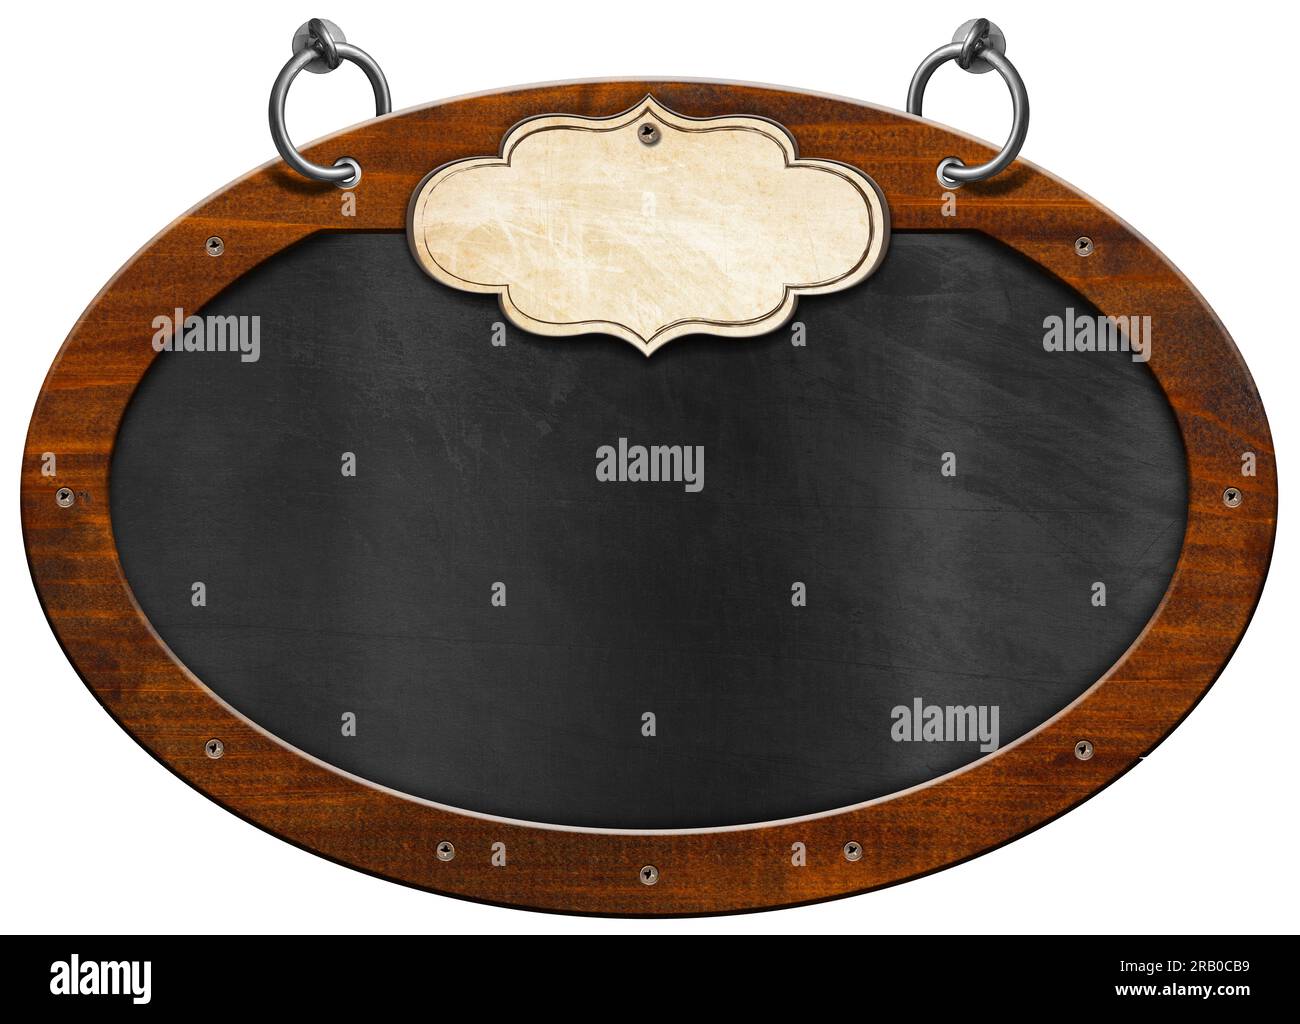 Blank blackboard with wooden oval frame (ellipse shape) and empty label. Steel rings for hanging. Isolated on white background, copy space, template. Stock Photo